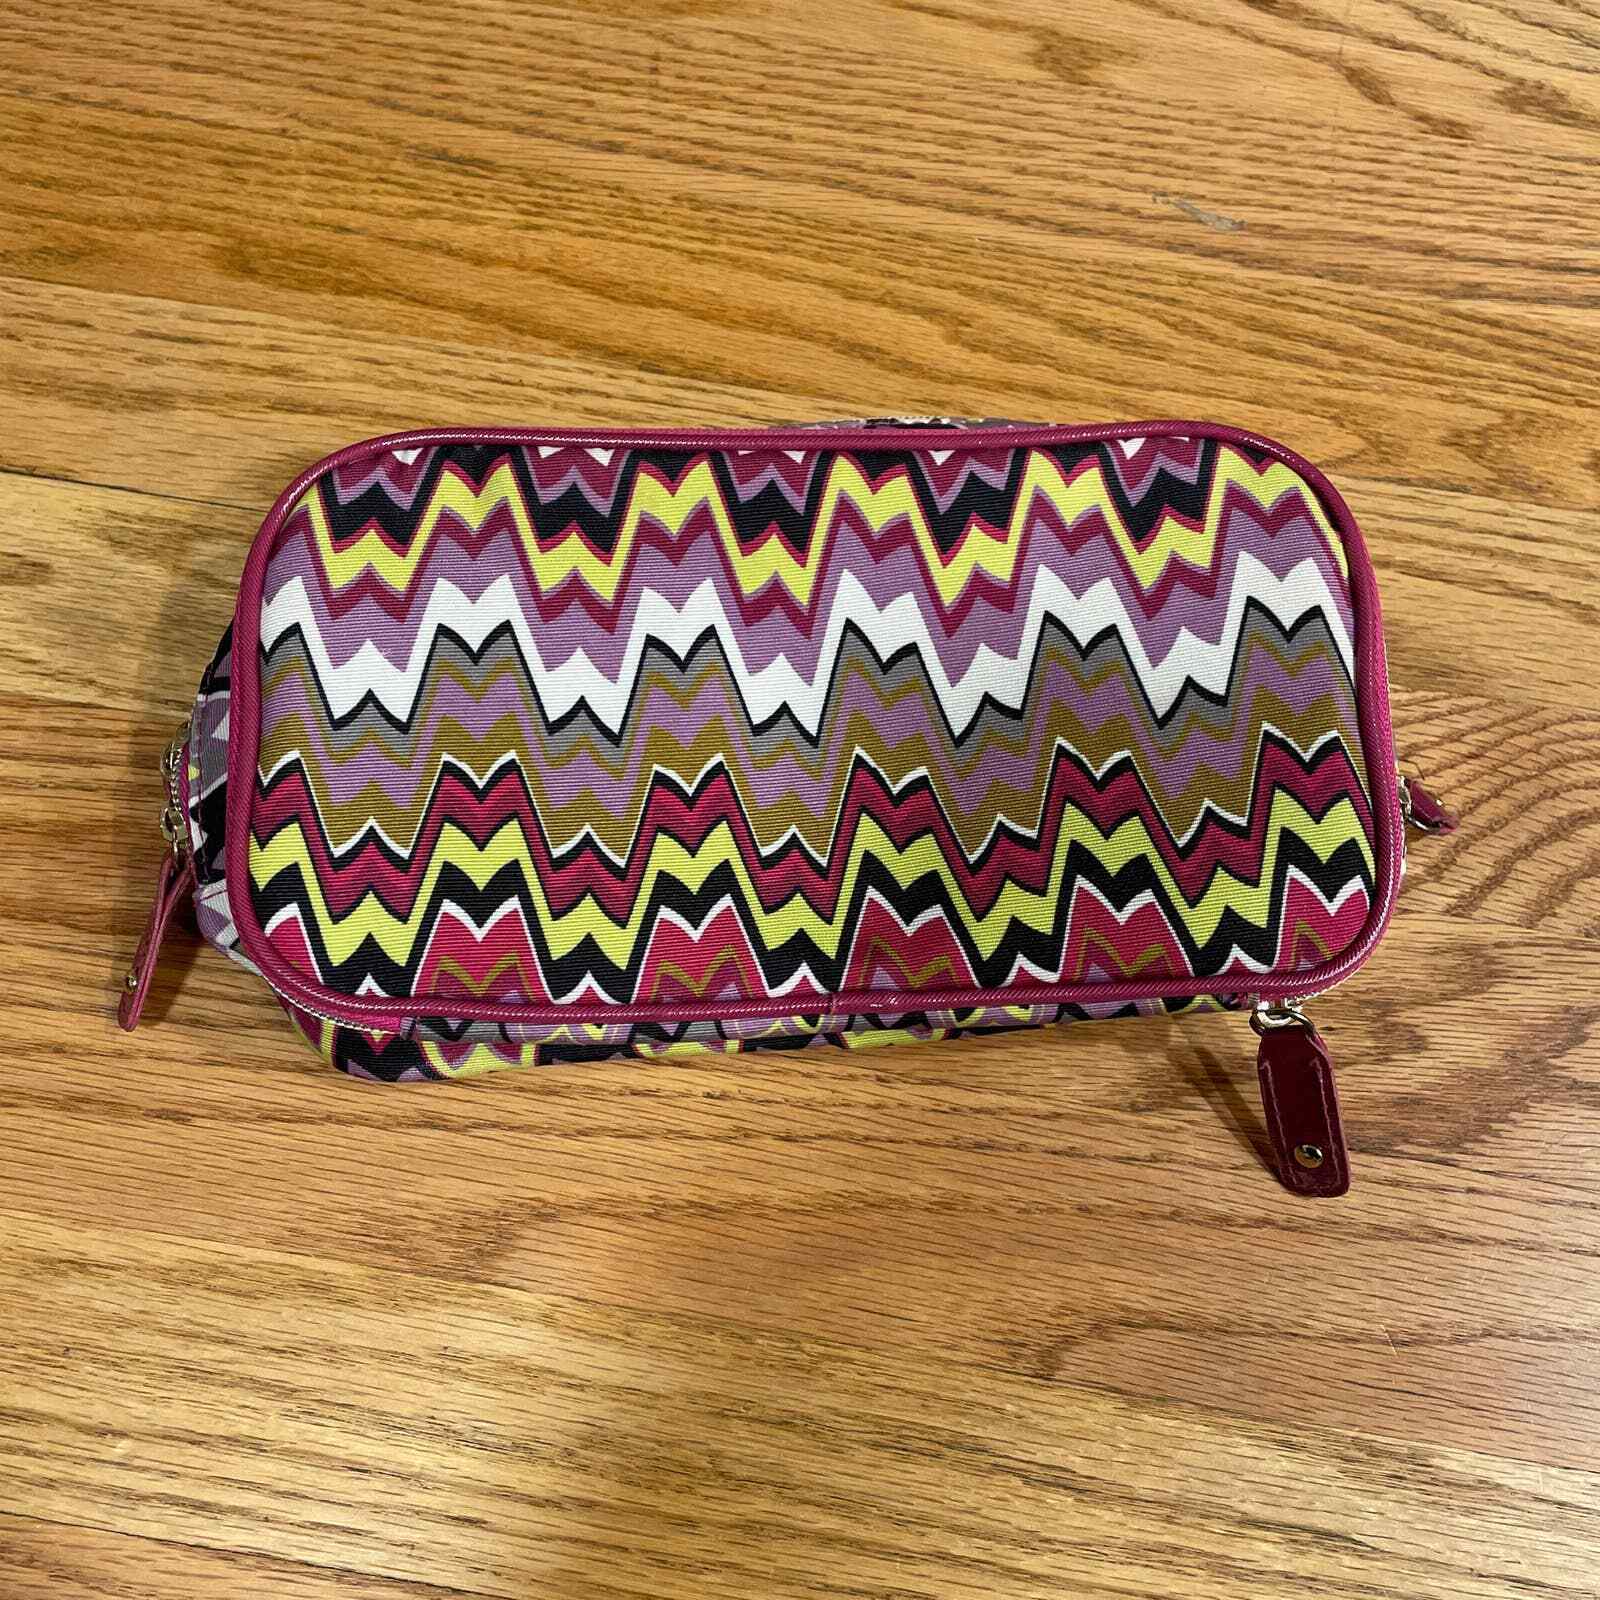 Missoni for Target cosmetics bag pink zig zags